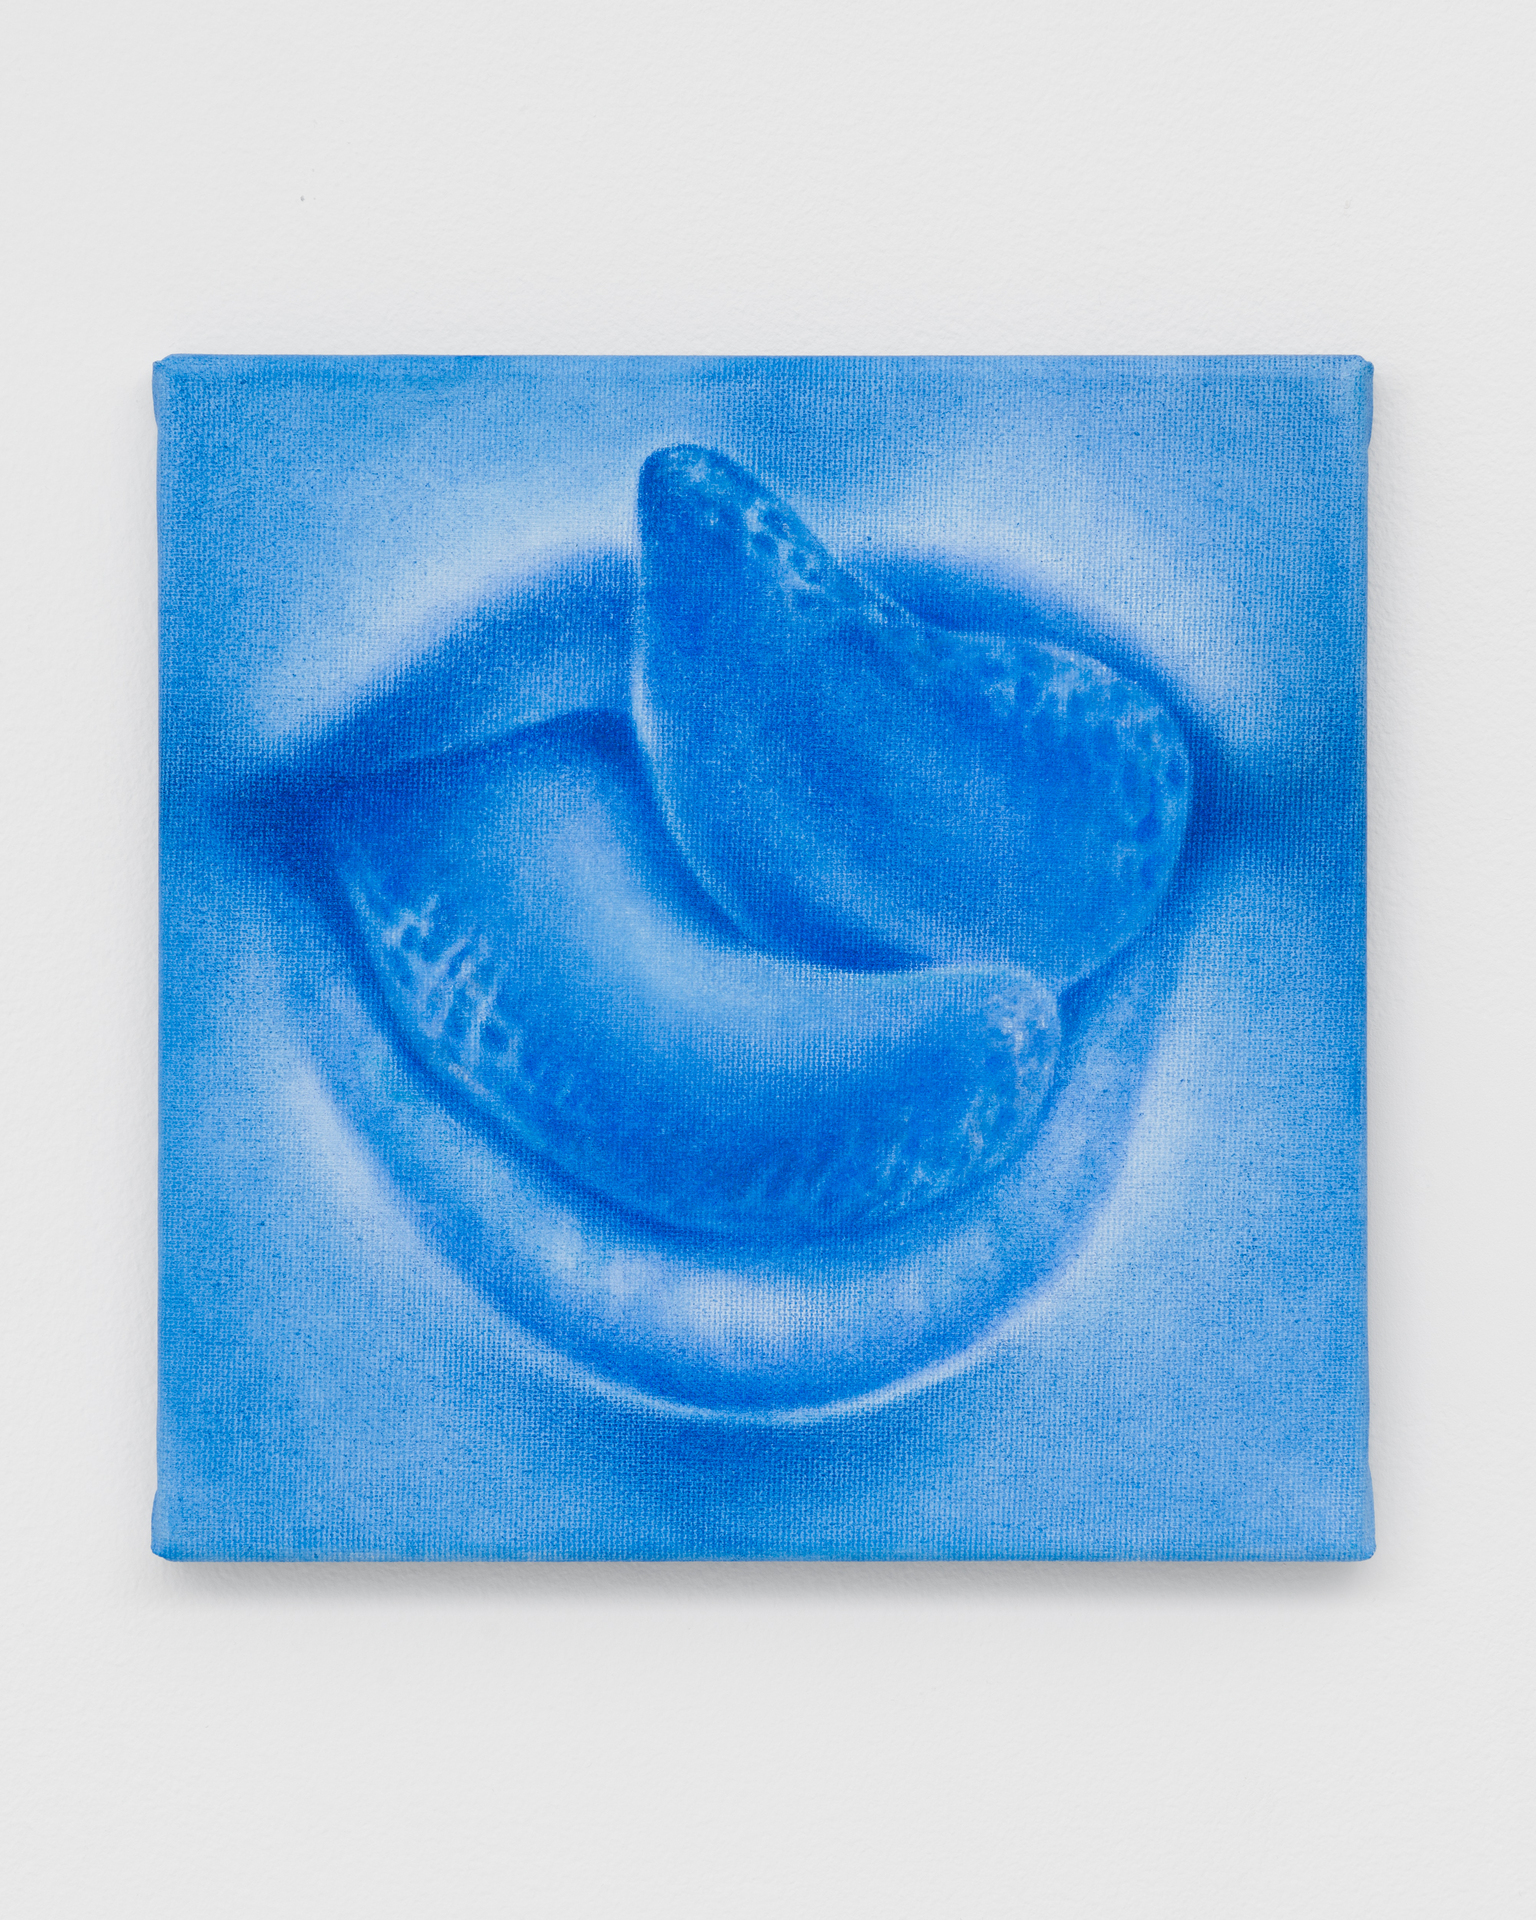 Signe Ralkov, Solemn tongue, 2022, soft pastel and coloured pencil on canvas, 26 x 26 cm